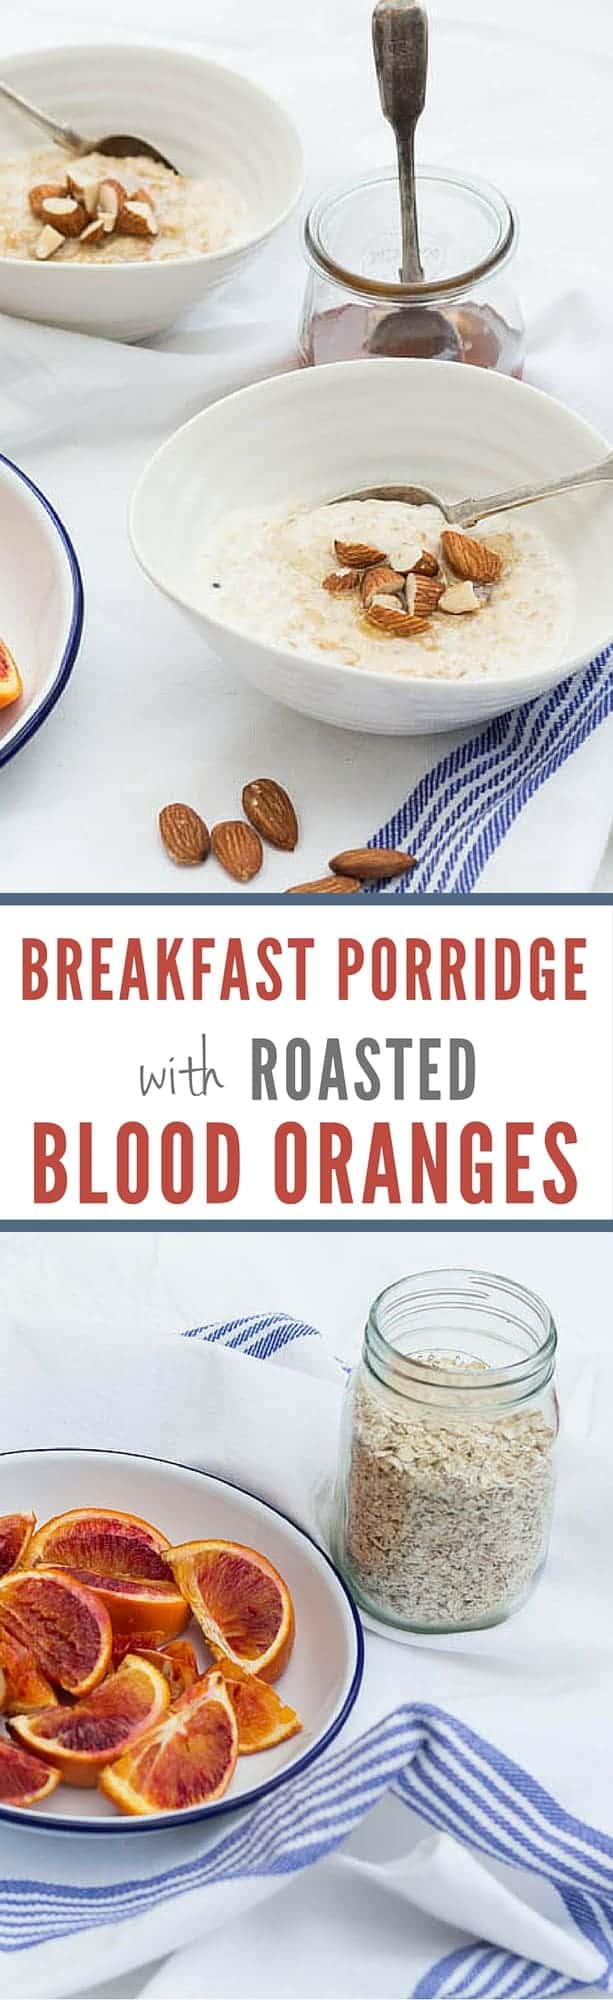 Breakfast Porridge with Roasted Blood Oranges | Recipes From A Pantry